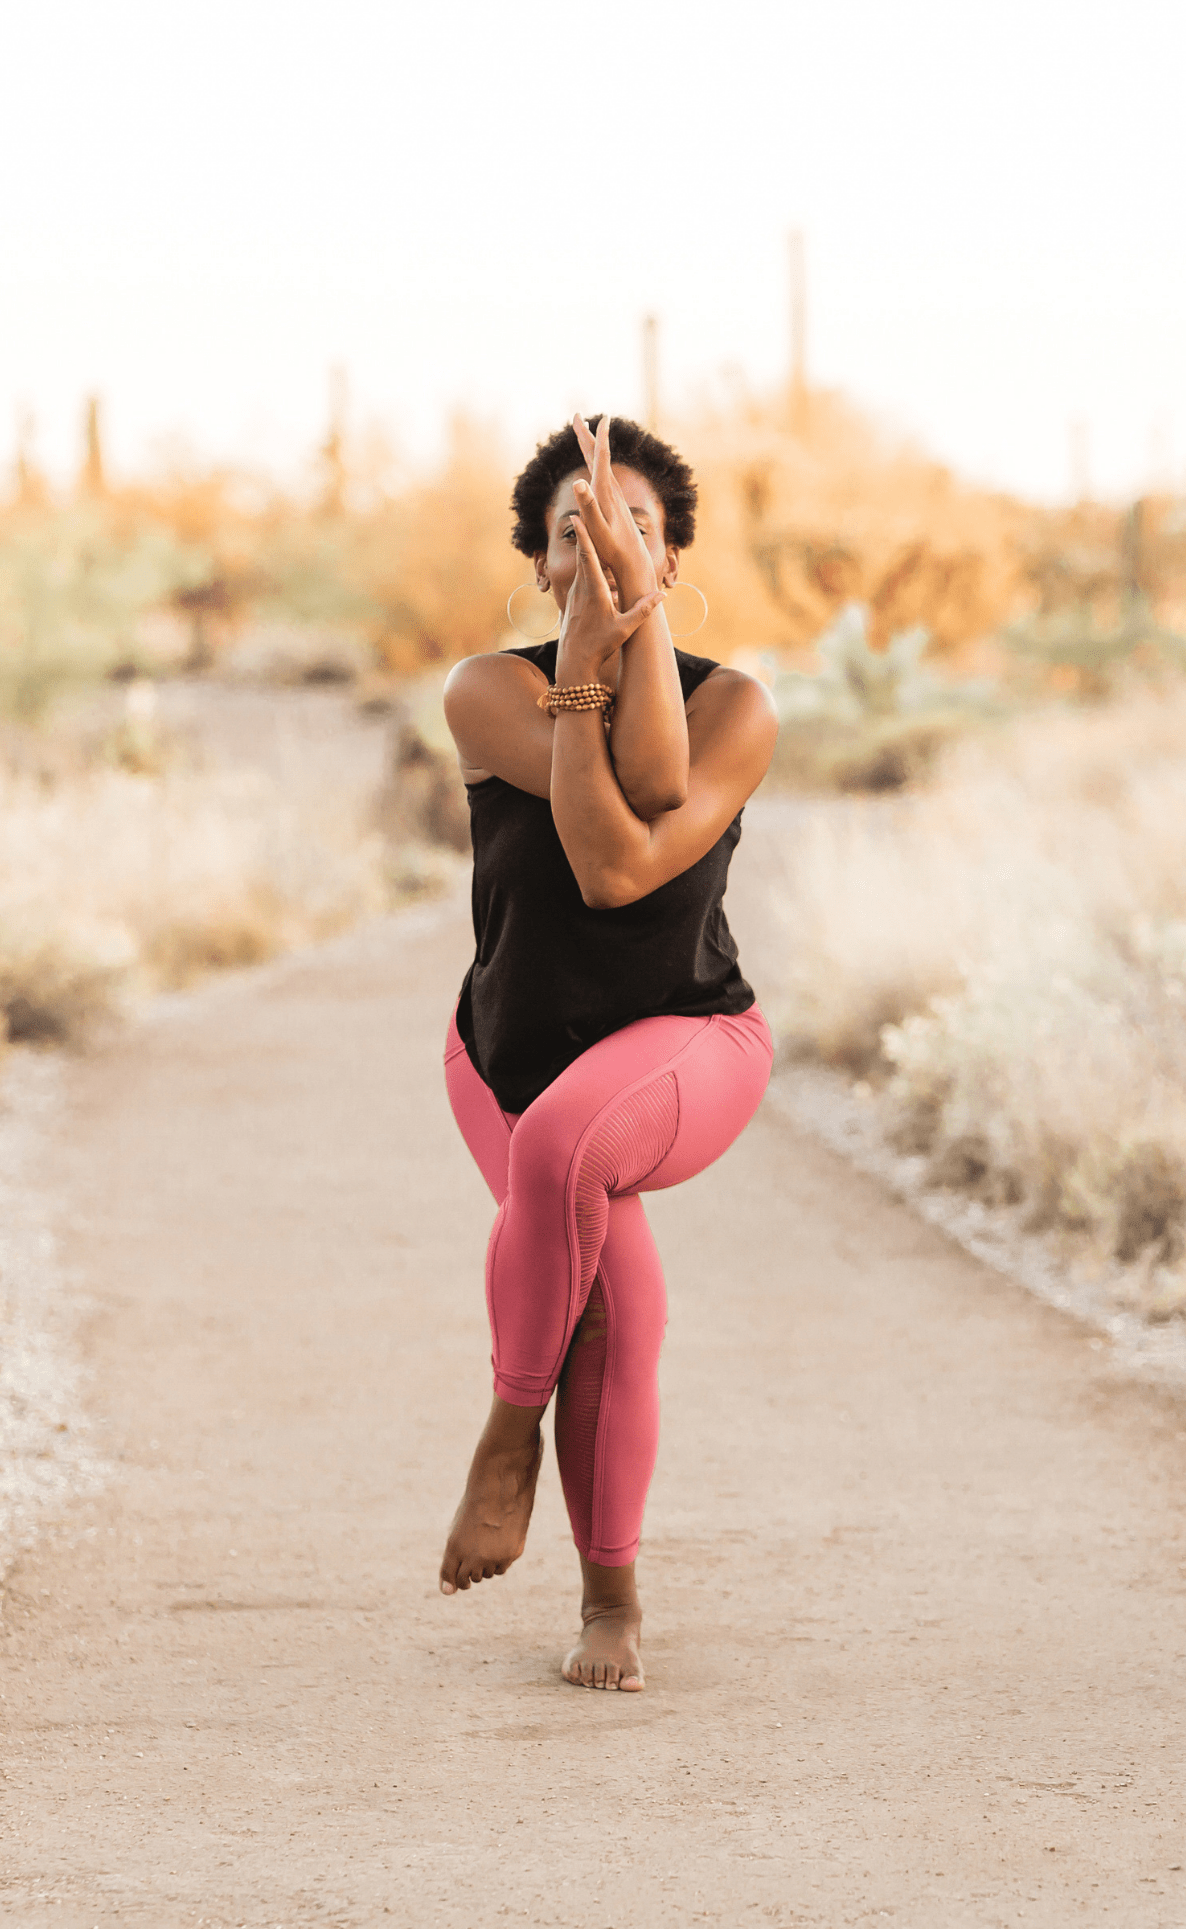 Black woman in black top pink pants doing garudasana or eagle yoga pose in a desert style background